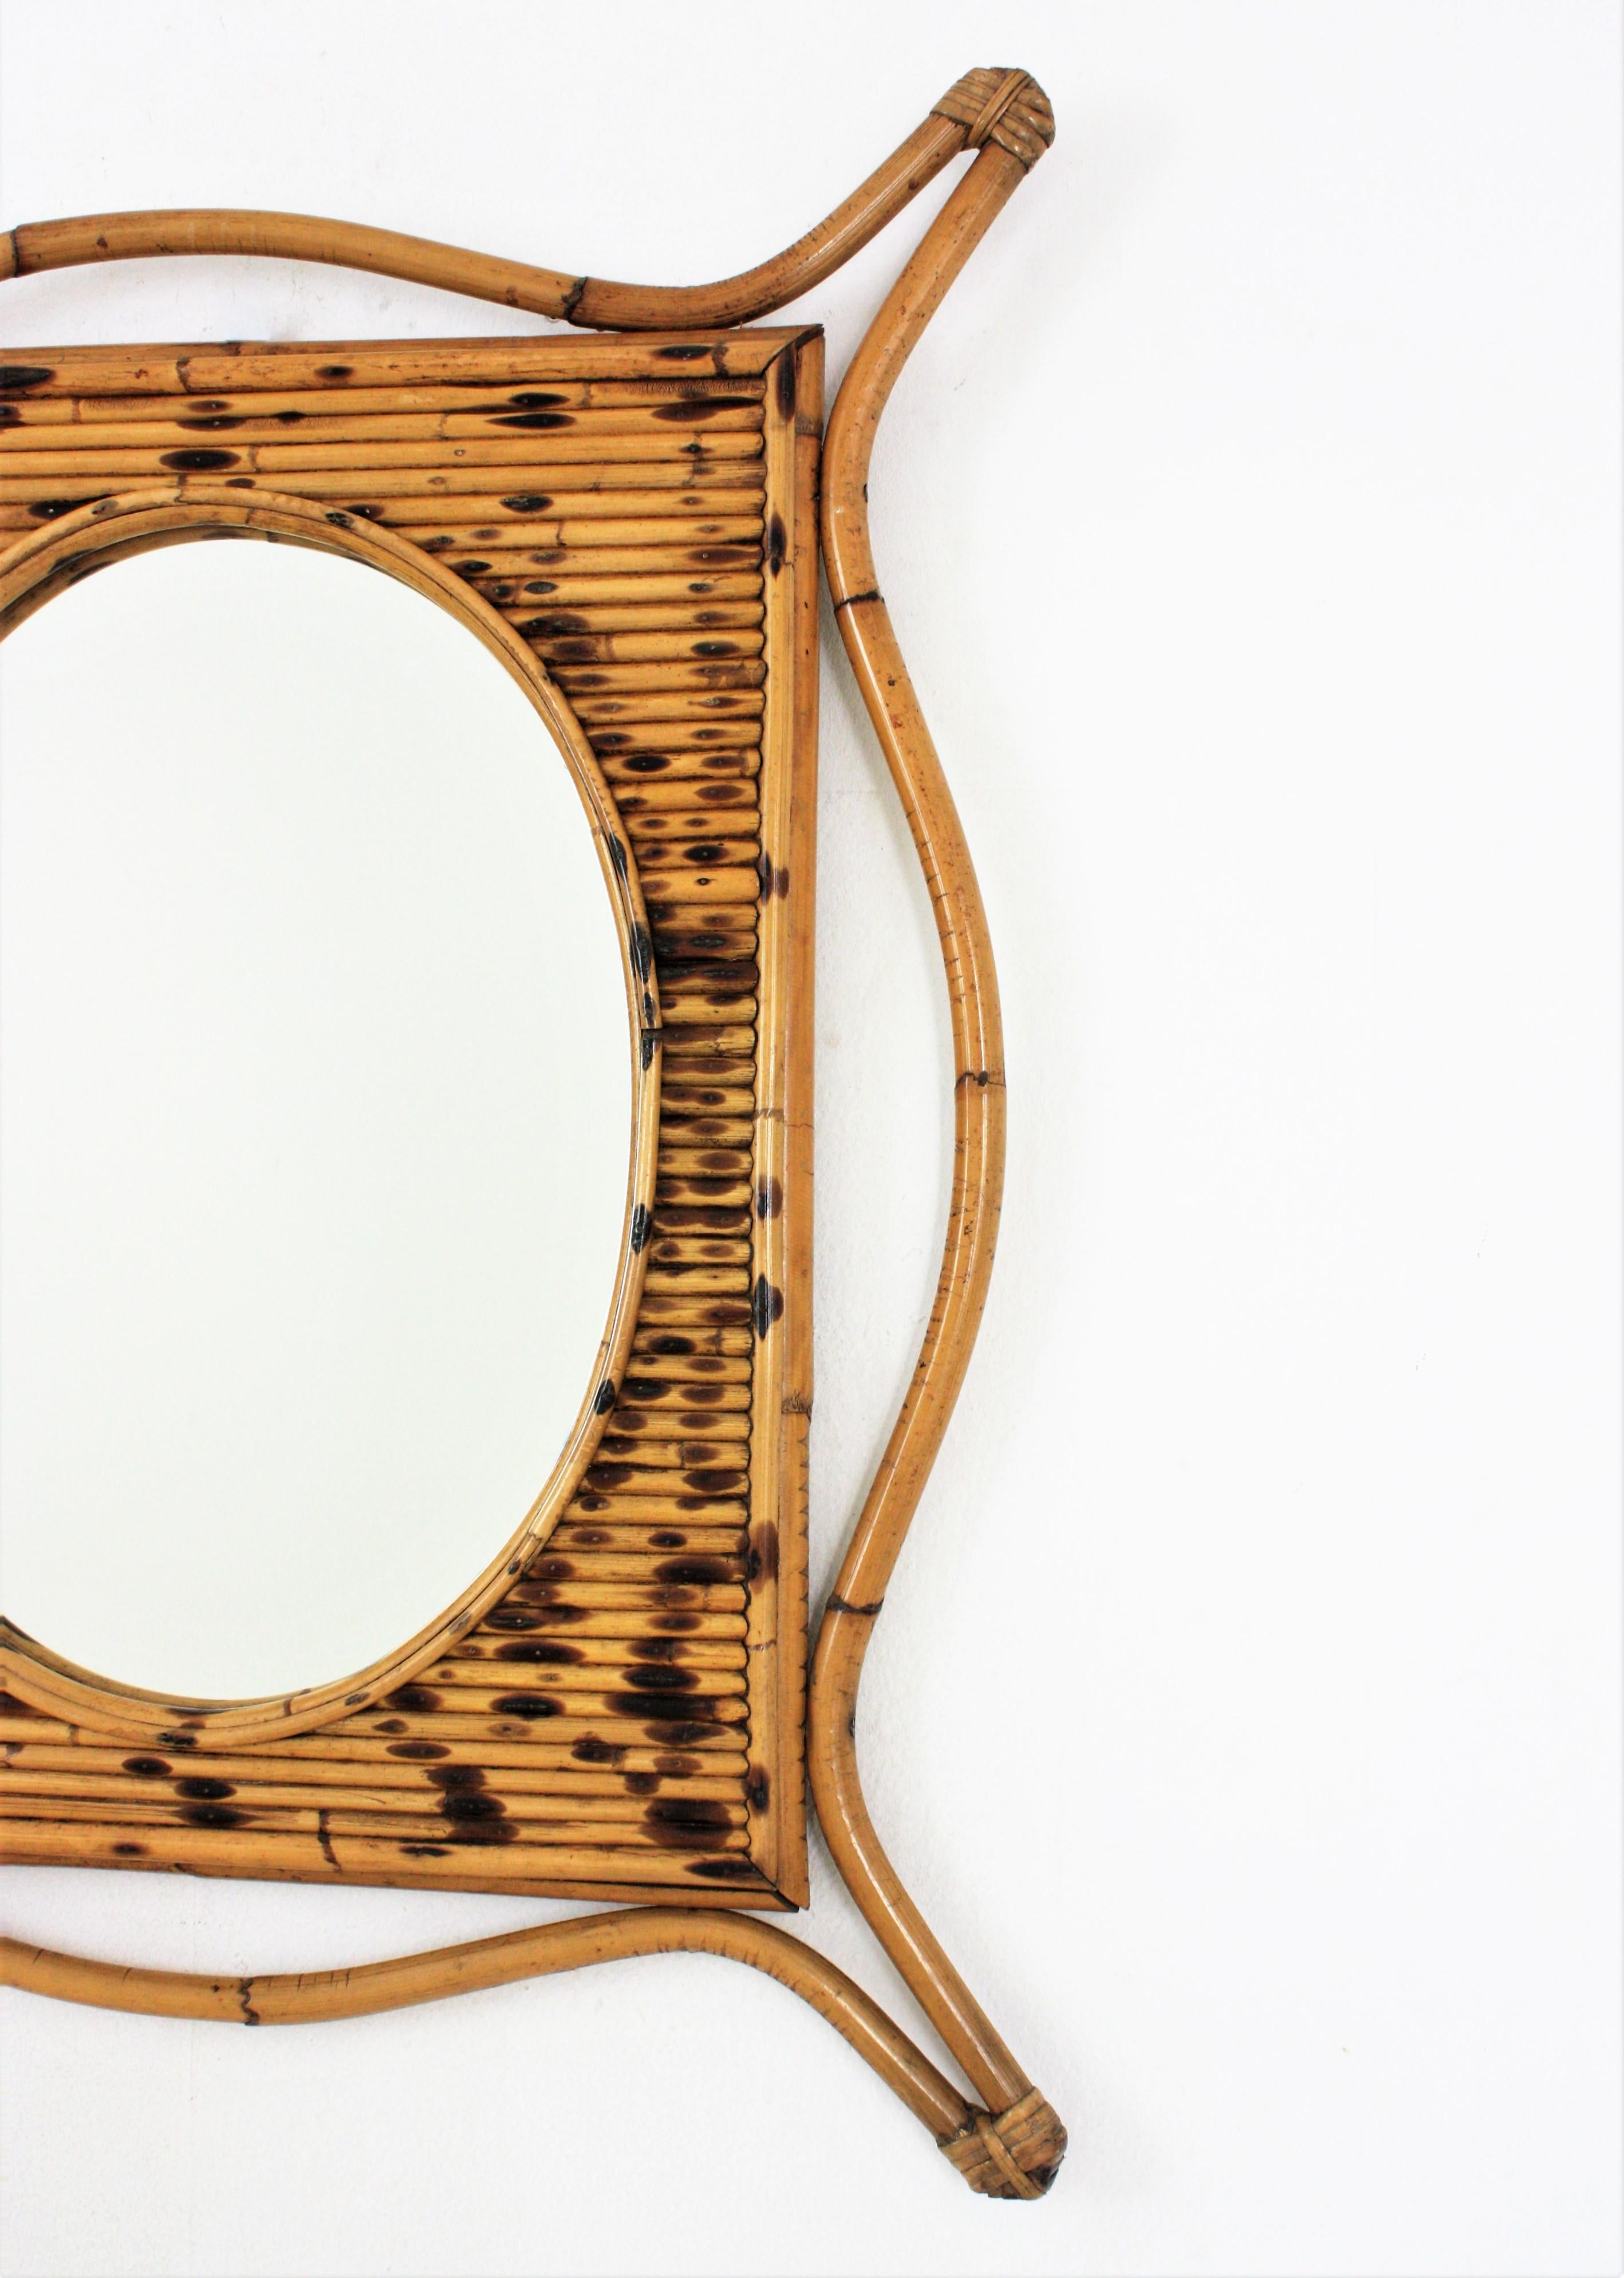 Hand-Crafted Rattan Bamboo Large Mirror with Split Reed Details, Spain, 1960s0s For Sale